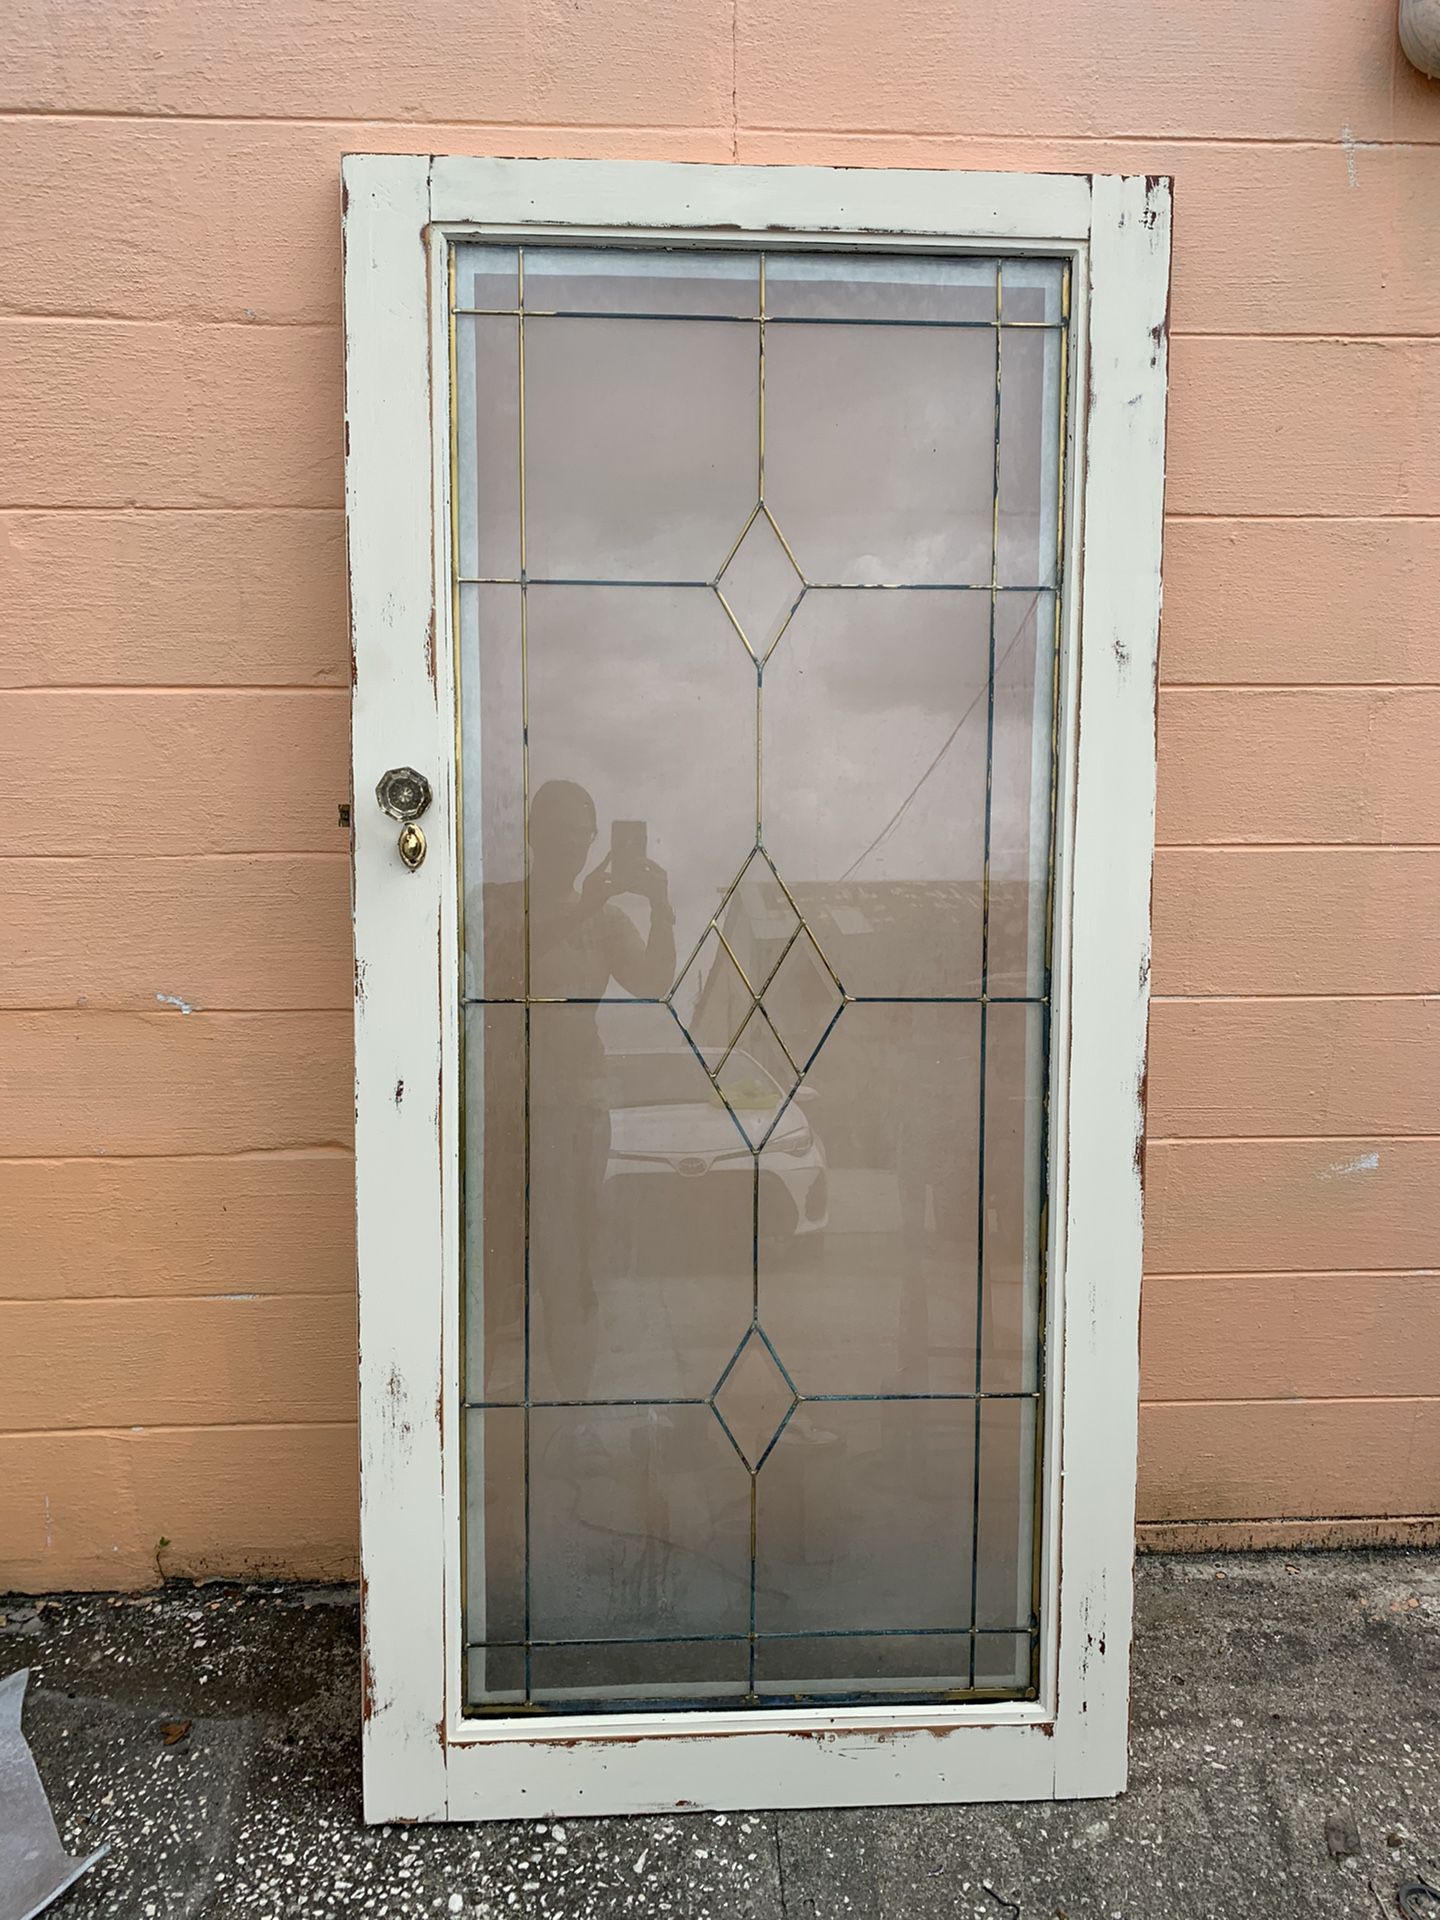 Beautiful Antique Lead Glass Shabby Chic Door - Could DIY into dinner or coffee table or wall decor